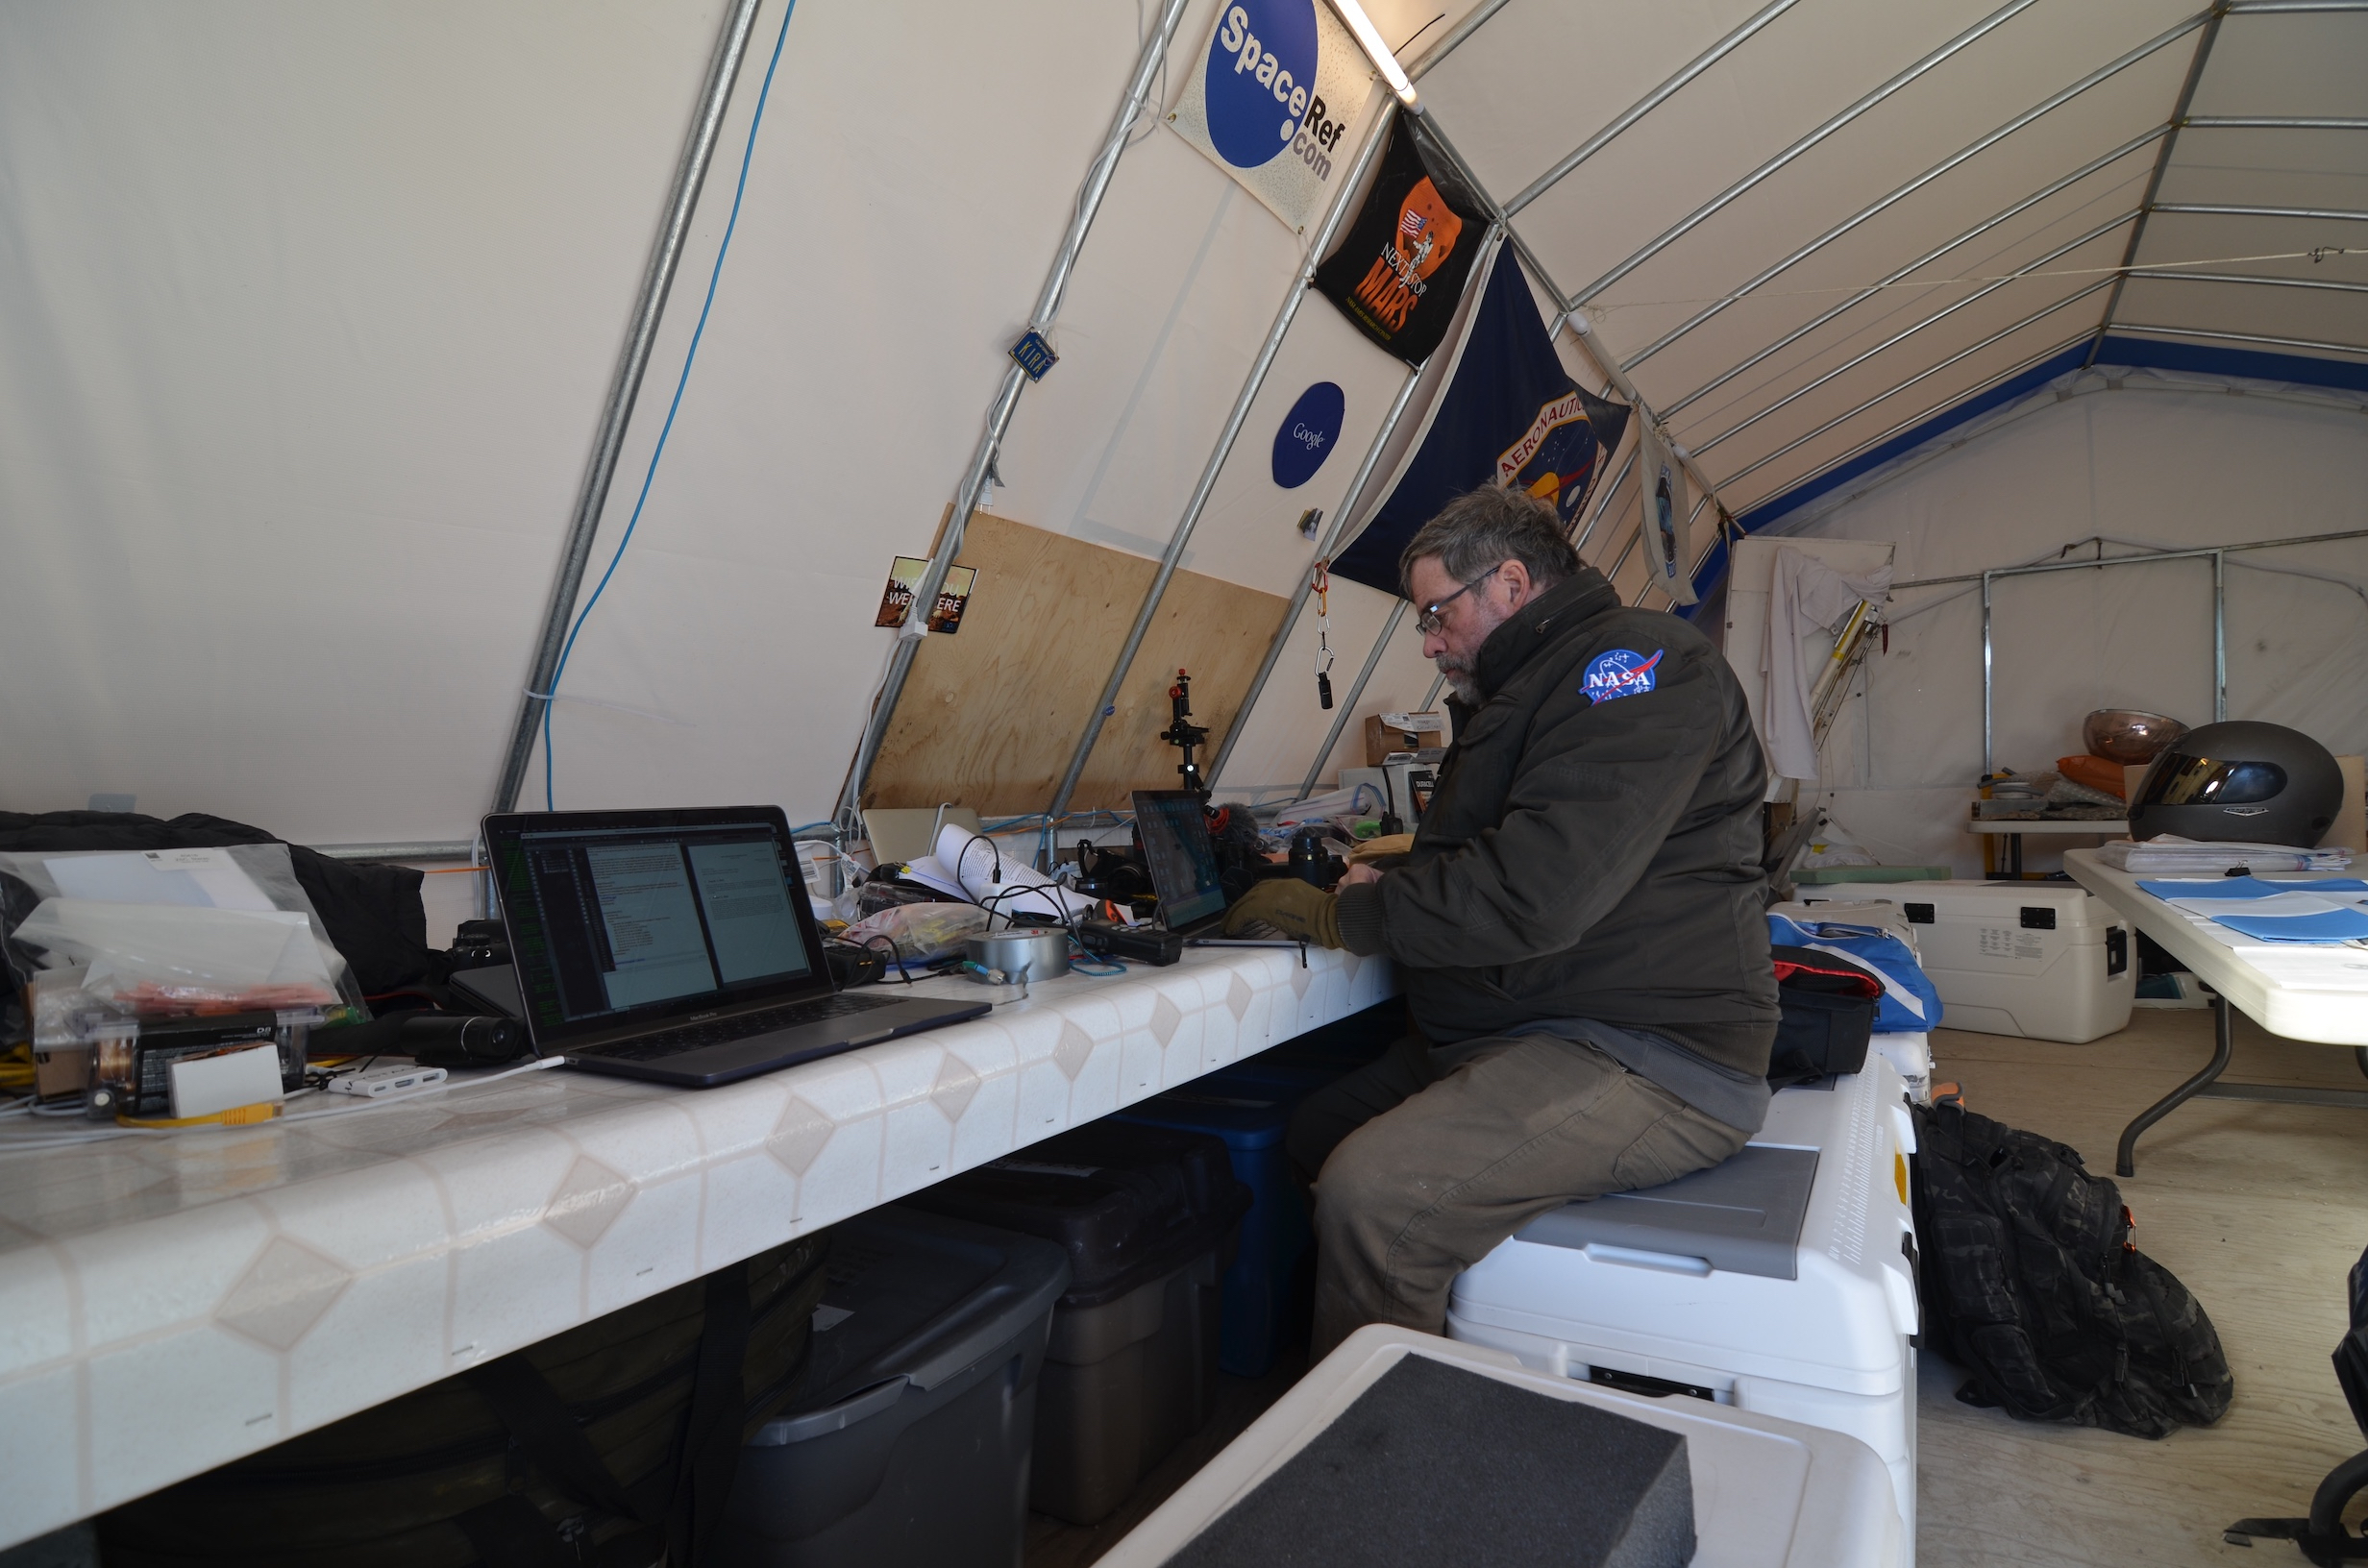 Downtime is an opportunity to catch up on work. Rod Pyle writes in the office tent